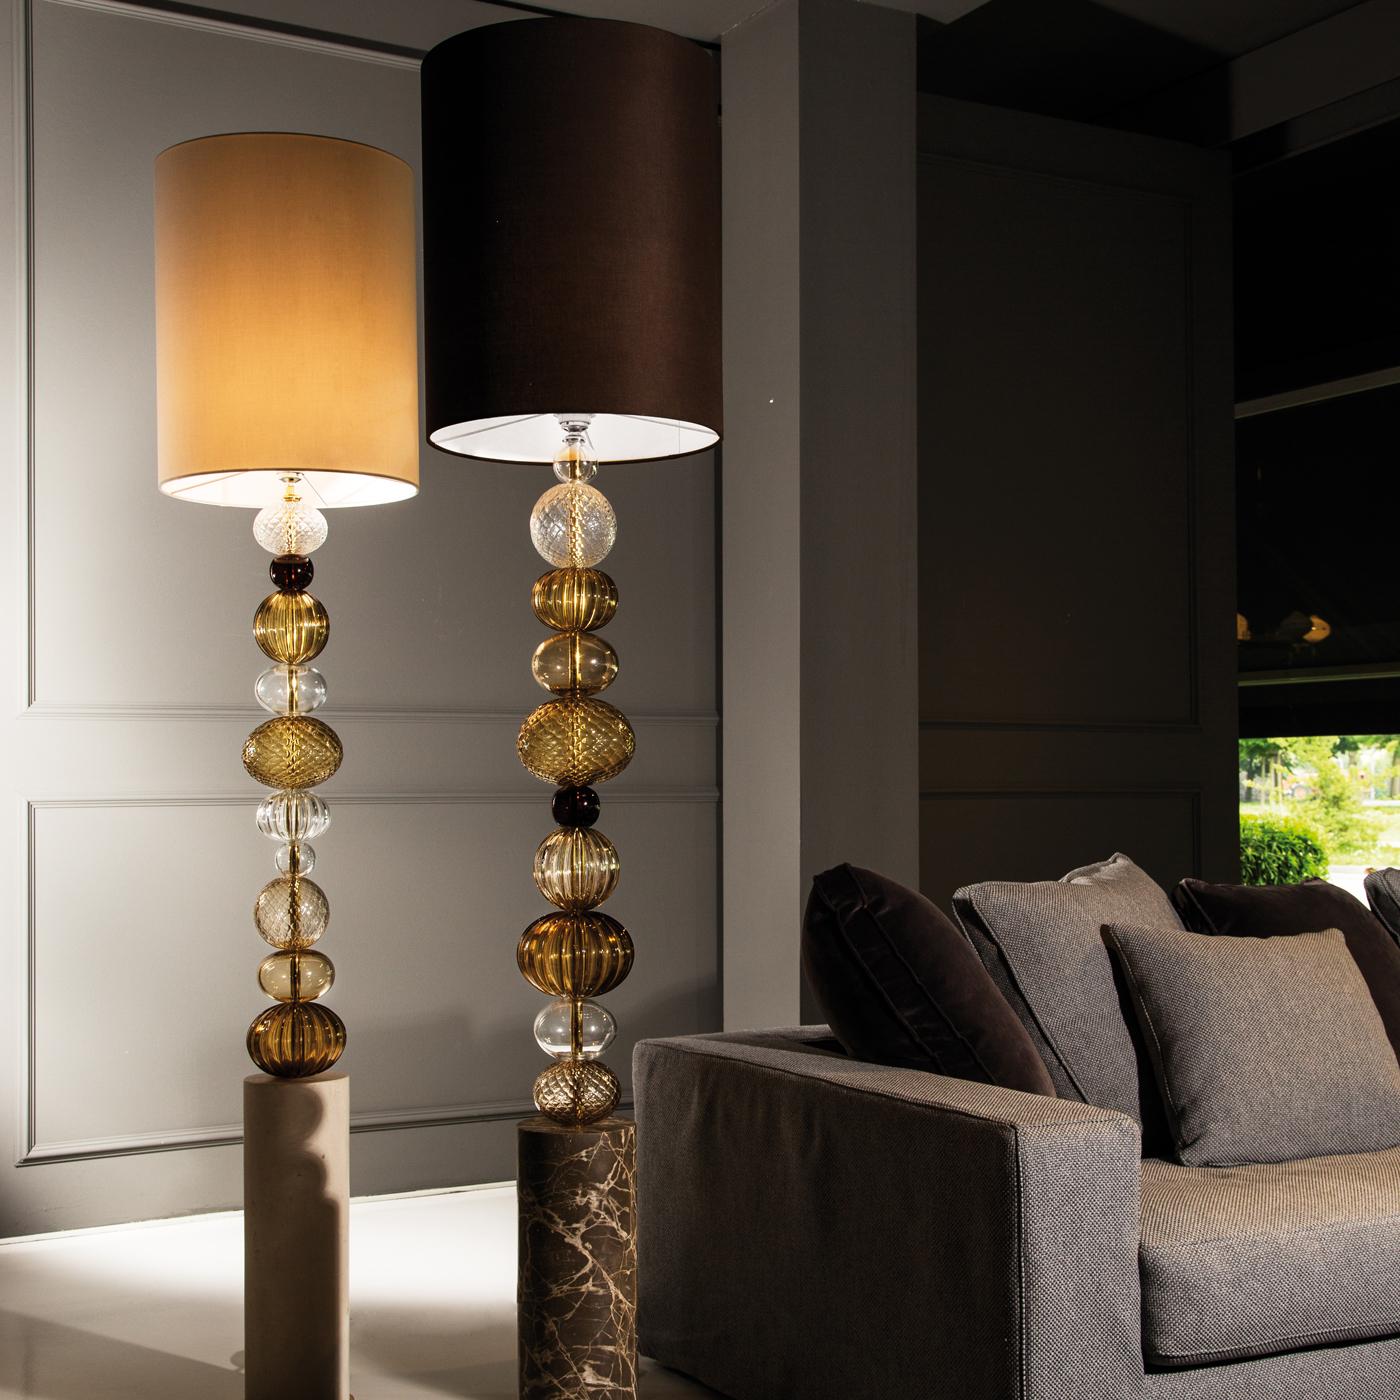 An extraordinary design of unmistakable sophistication, this floor lamp designed by Antonio Ventimiglia is characterized by a harmonious combination of shapes and fine materials that provide a striking visual and functional aesthetic. Enclosed